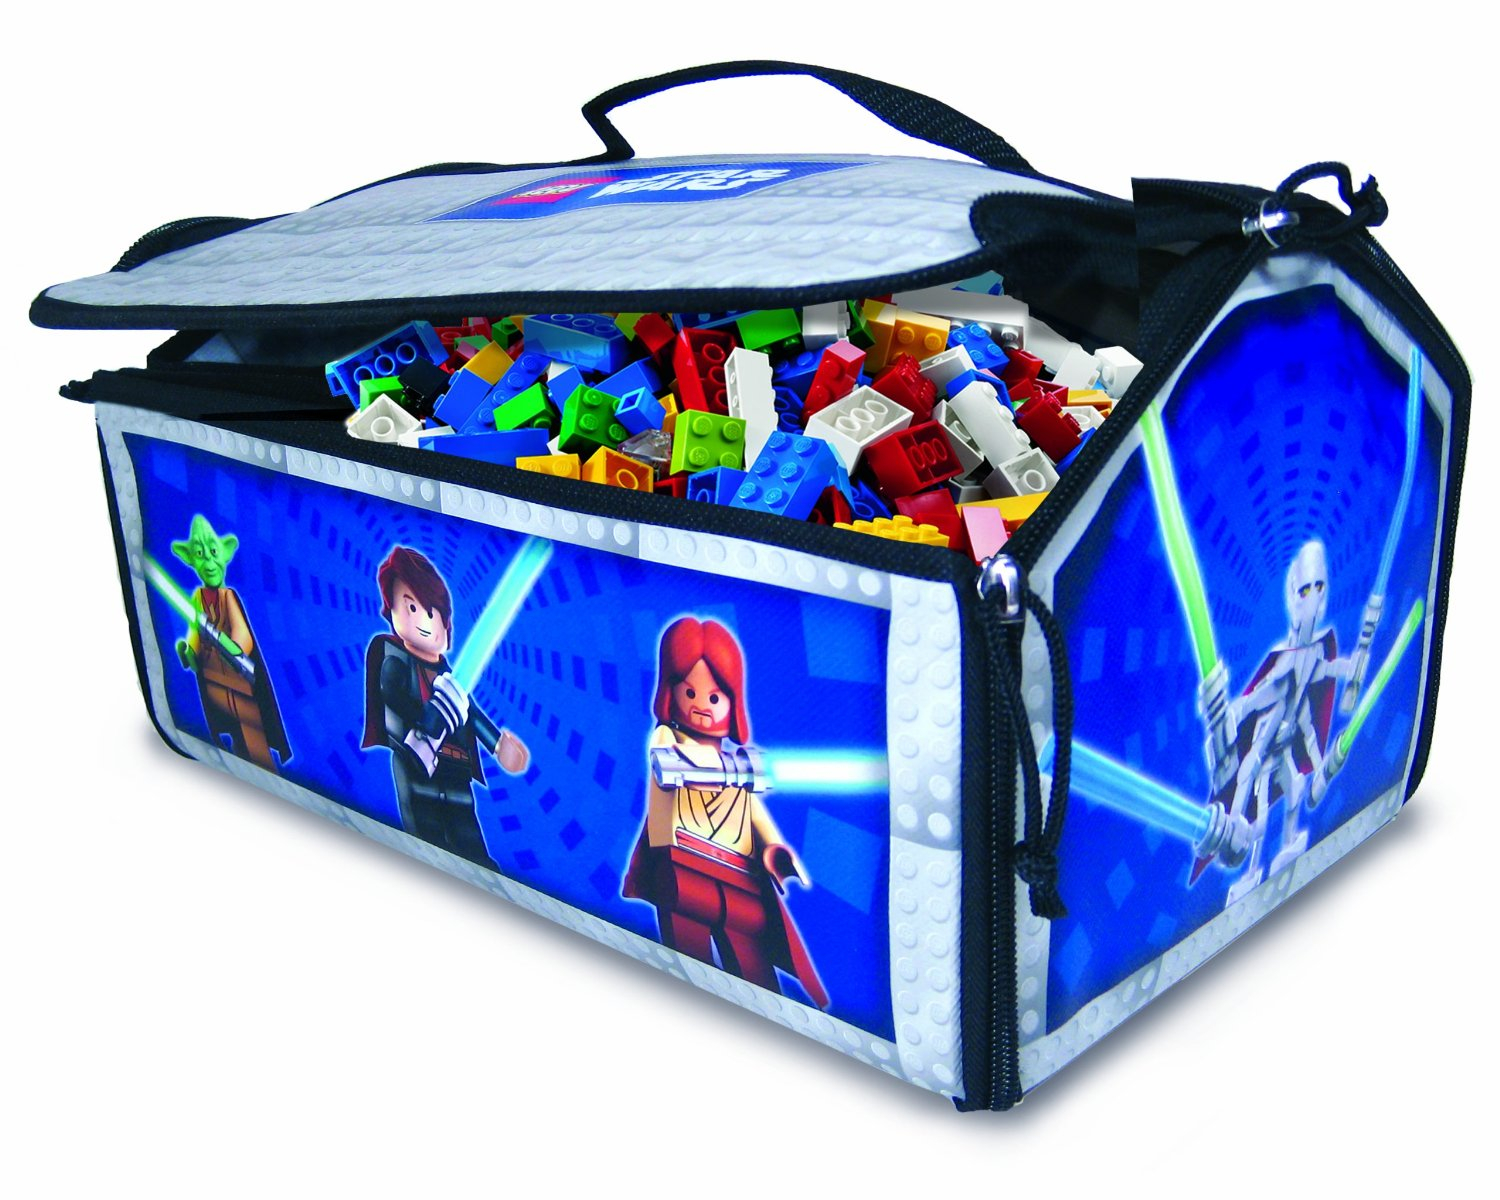 Lego Star Wars Storage Bin And Playmat 1197 From 1997 within dimensions 1500 X 1200